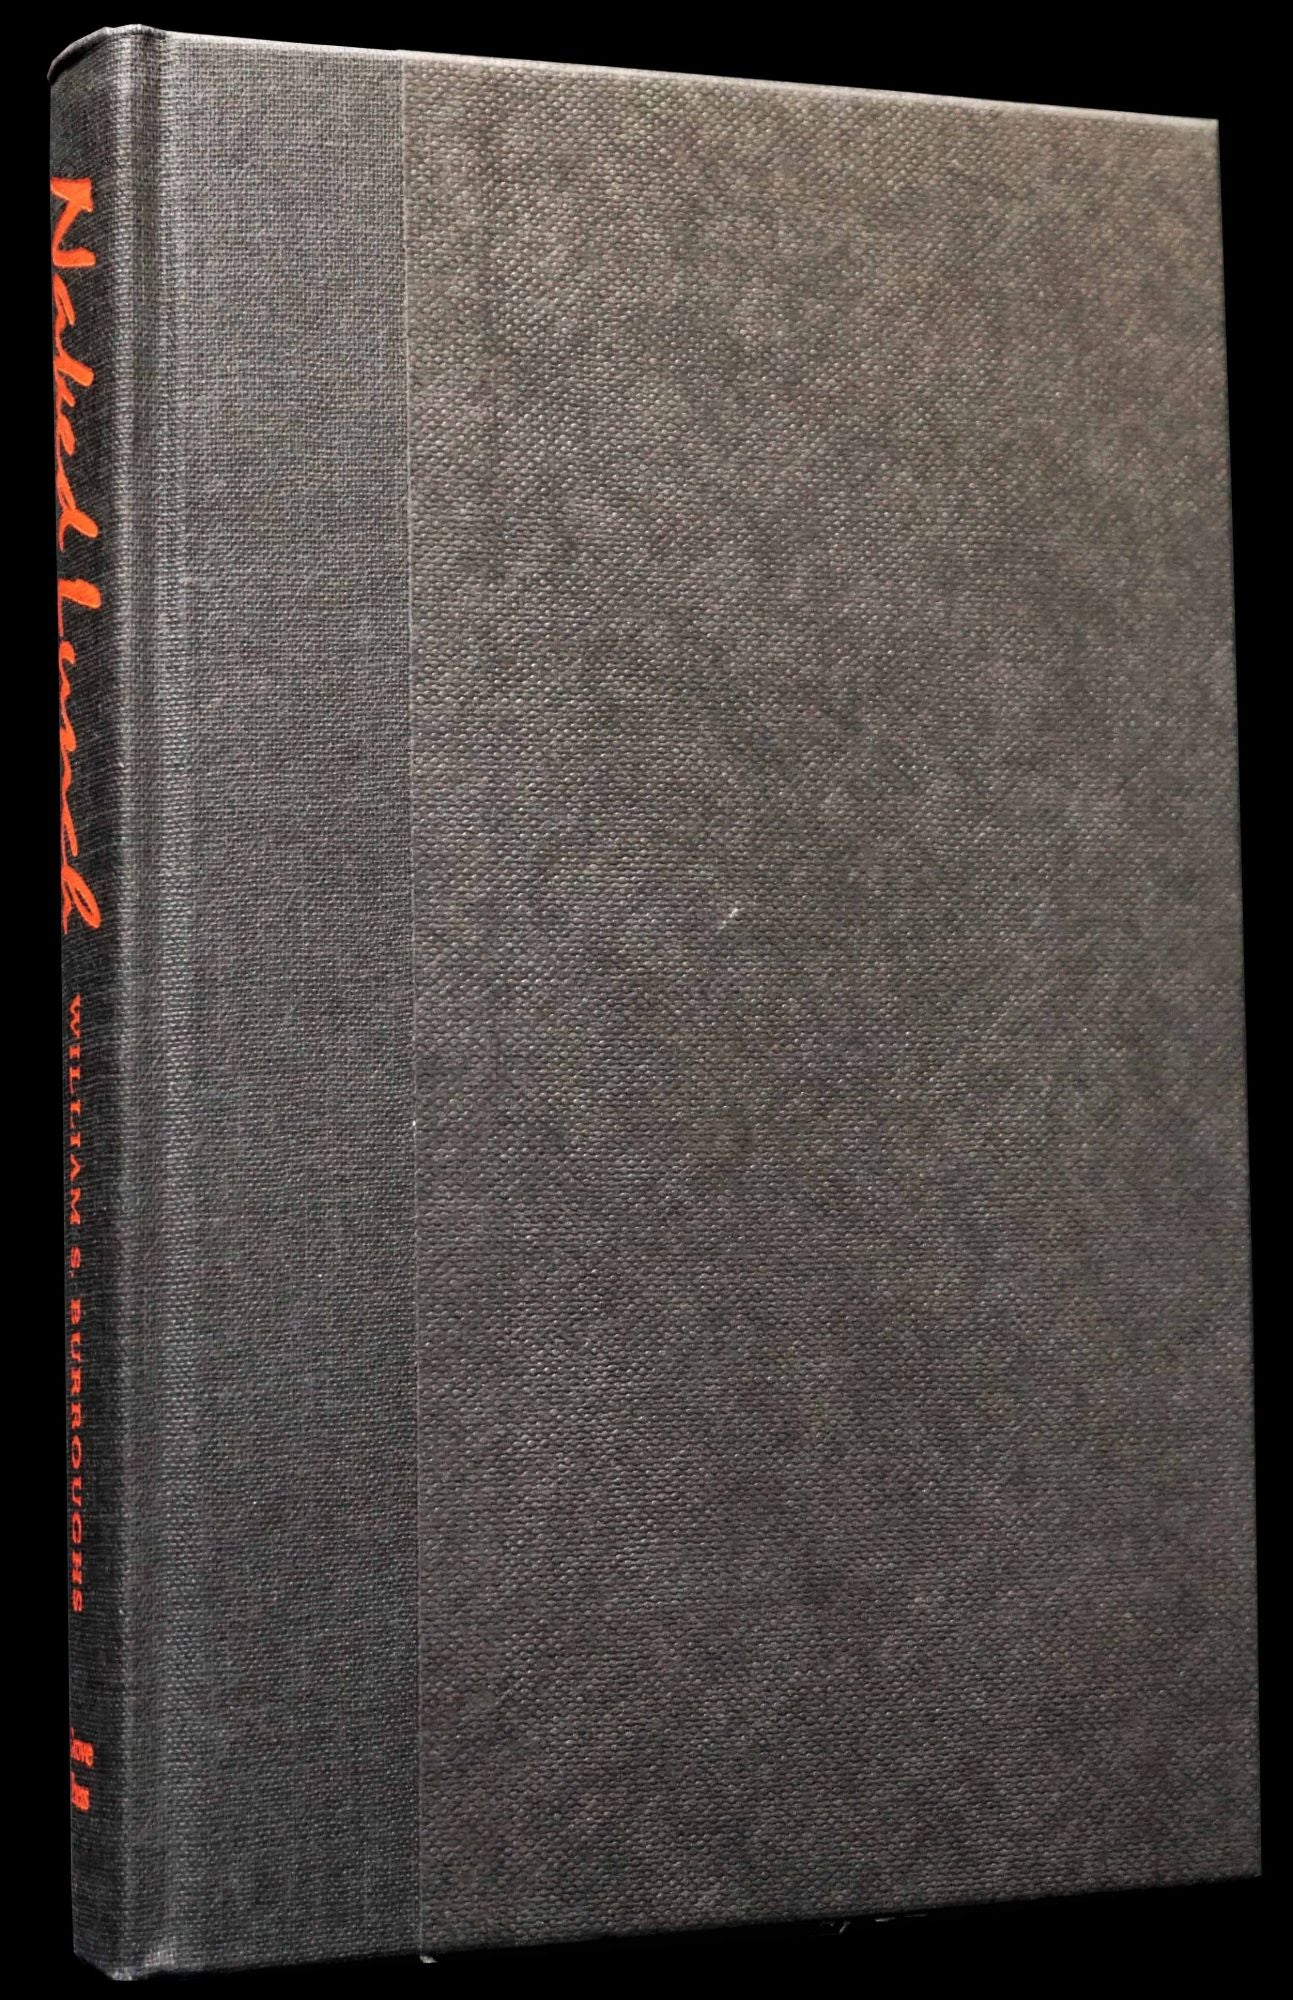 Naked Lunch by William Burroughs (1959) first trade edition book